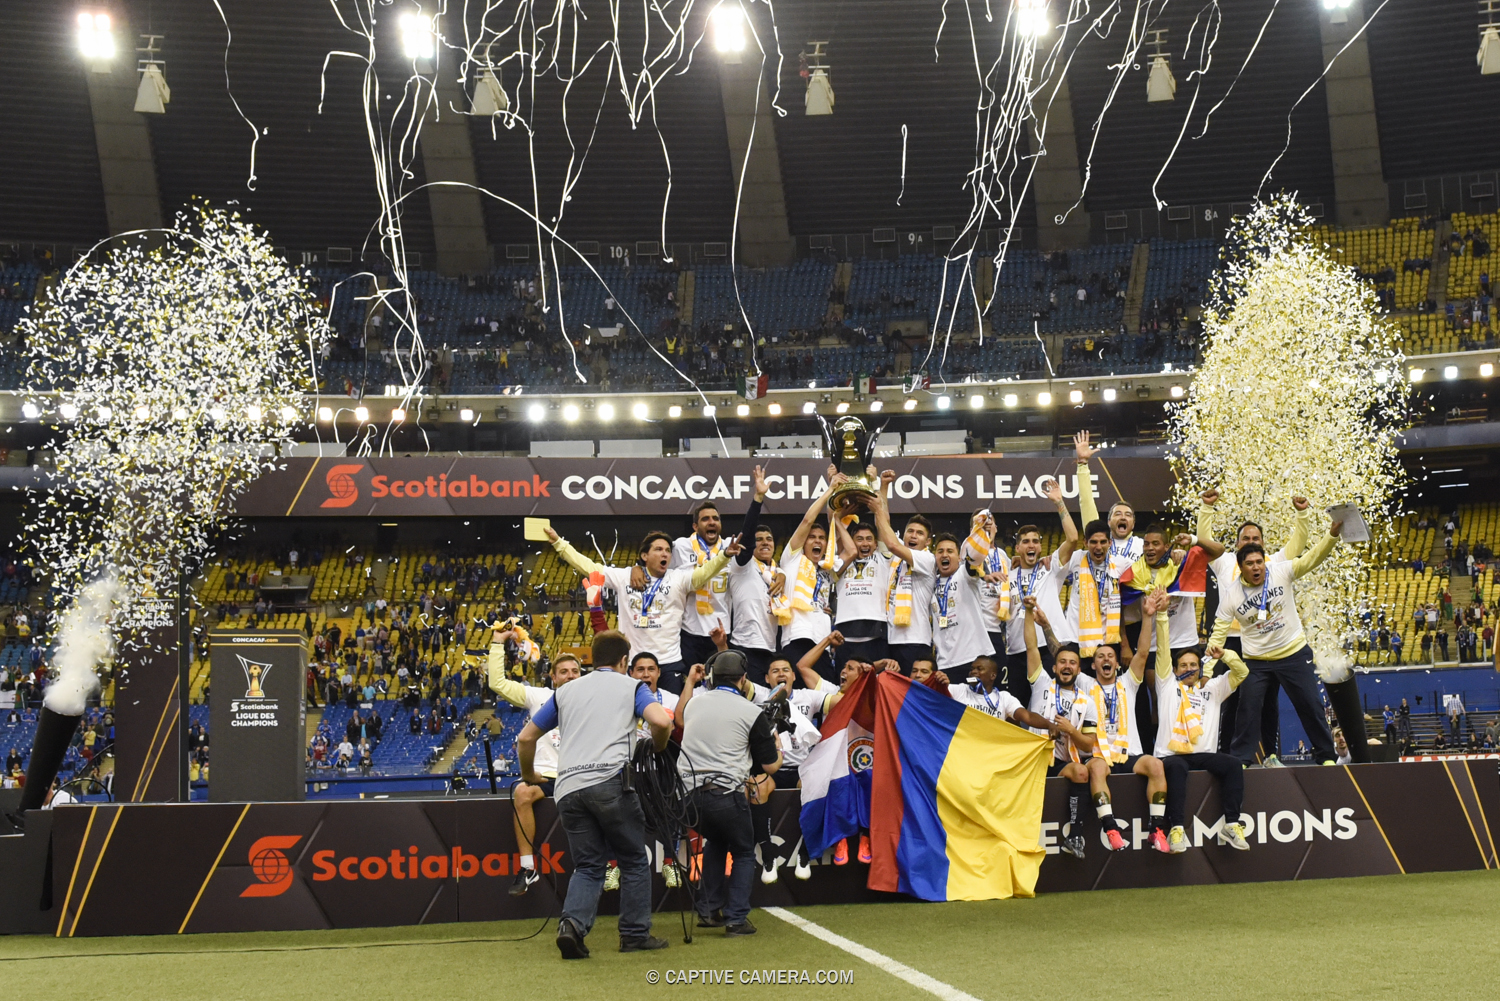 CLUB AMERICA WINS SCOTIABANK CONCACAF CHAMPIONS LEAGUE 2015